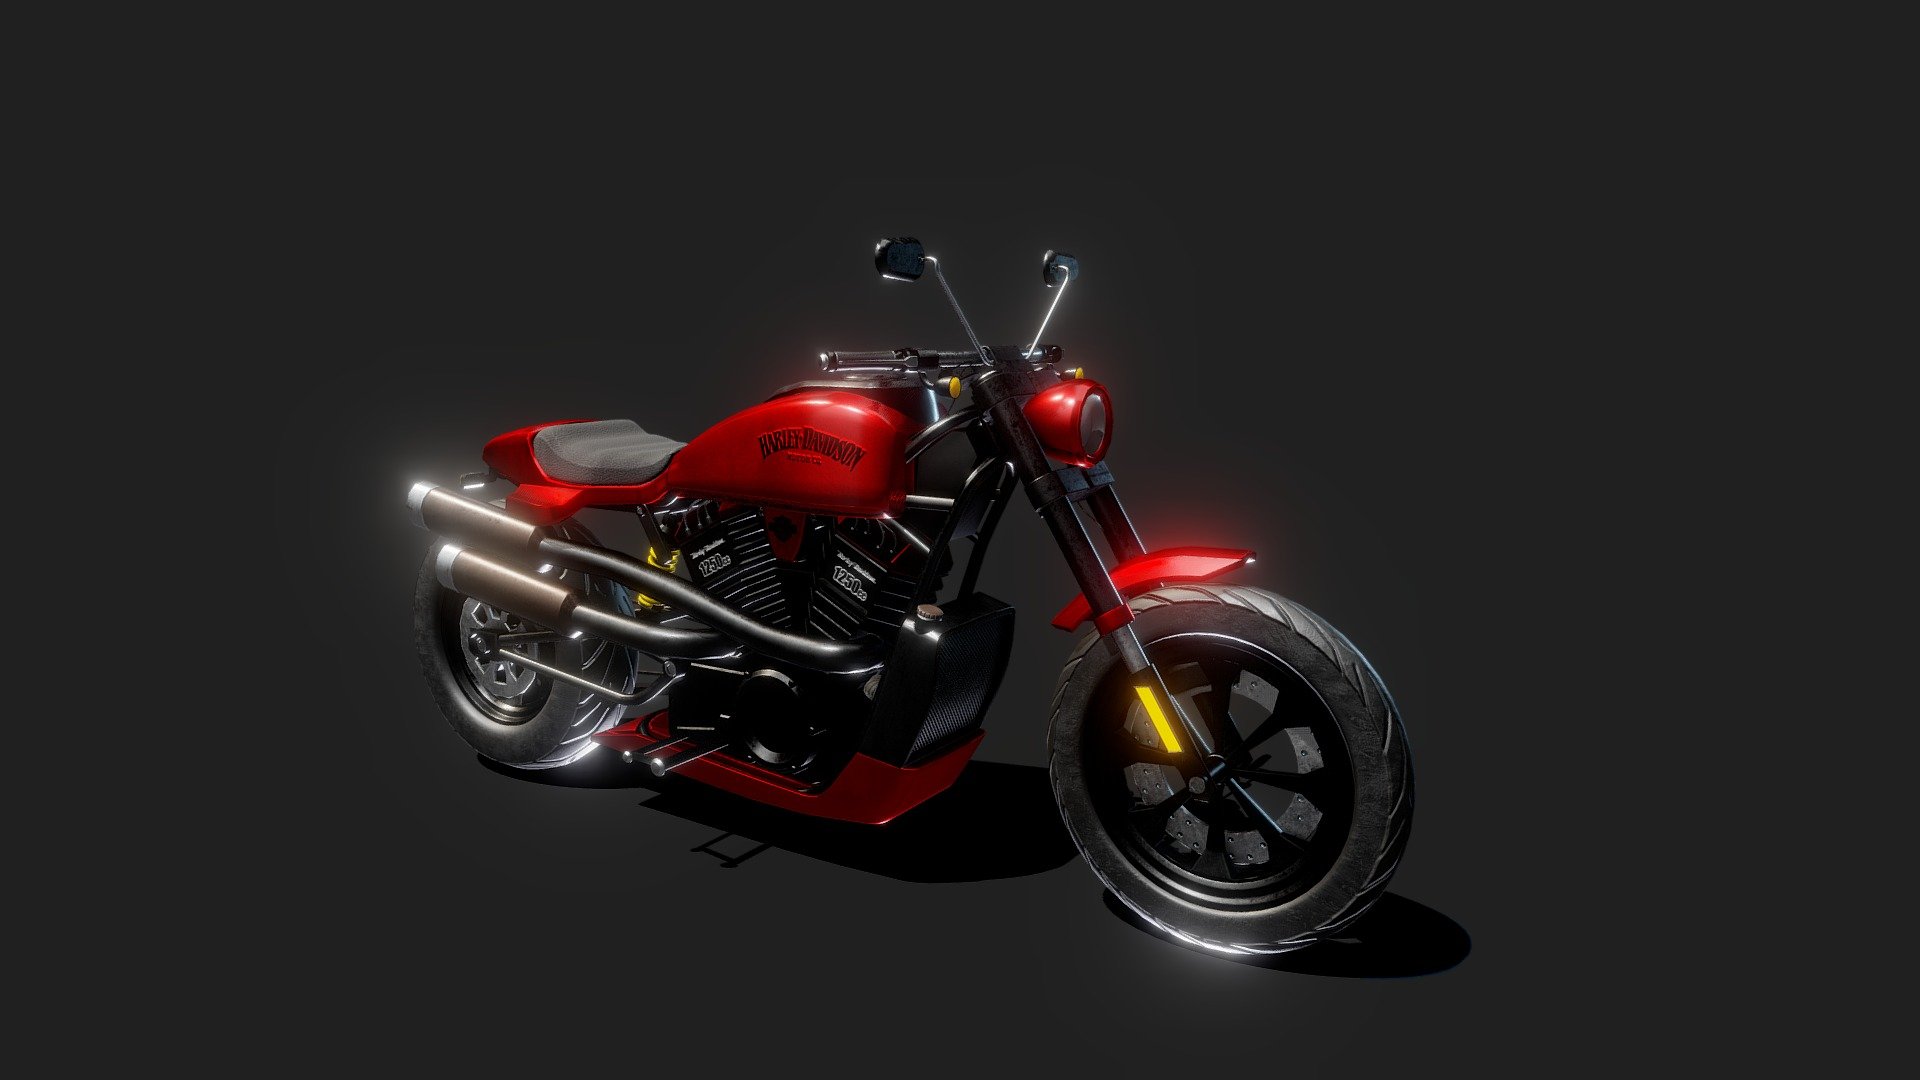 First time ever modelling a Vehicle so I thought I'd go with a personal favourite of mine and do a Harley.

For a first time stab at making a Vehicle I wouldn't say I've done too bad, learned a bit about Bikes from my Dad too in the process so a pretty fun build overall.

Ended up topping out at 73k tris so more of a mid poly model than low 3d model